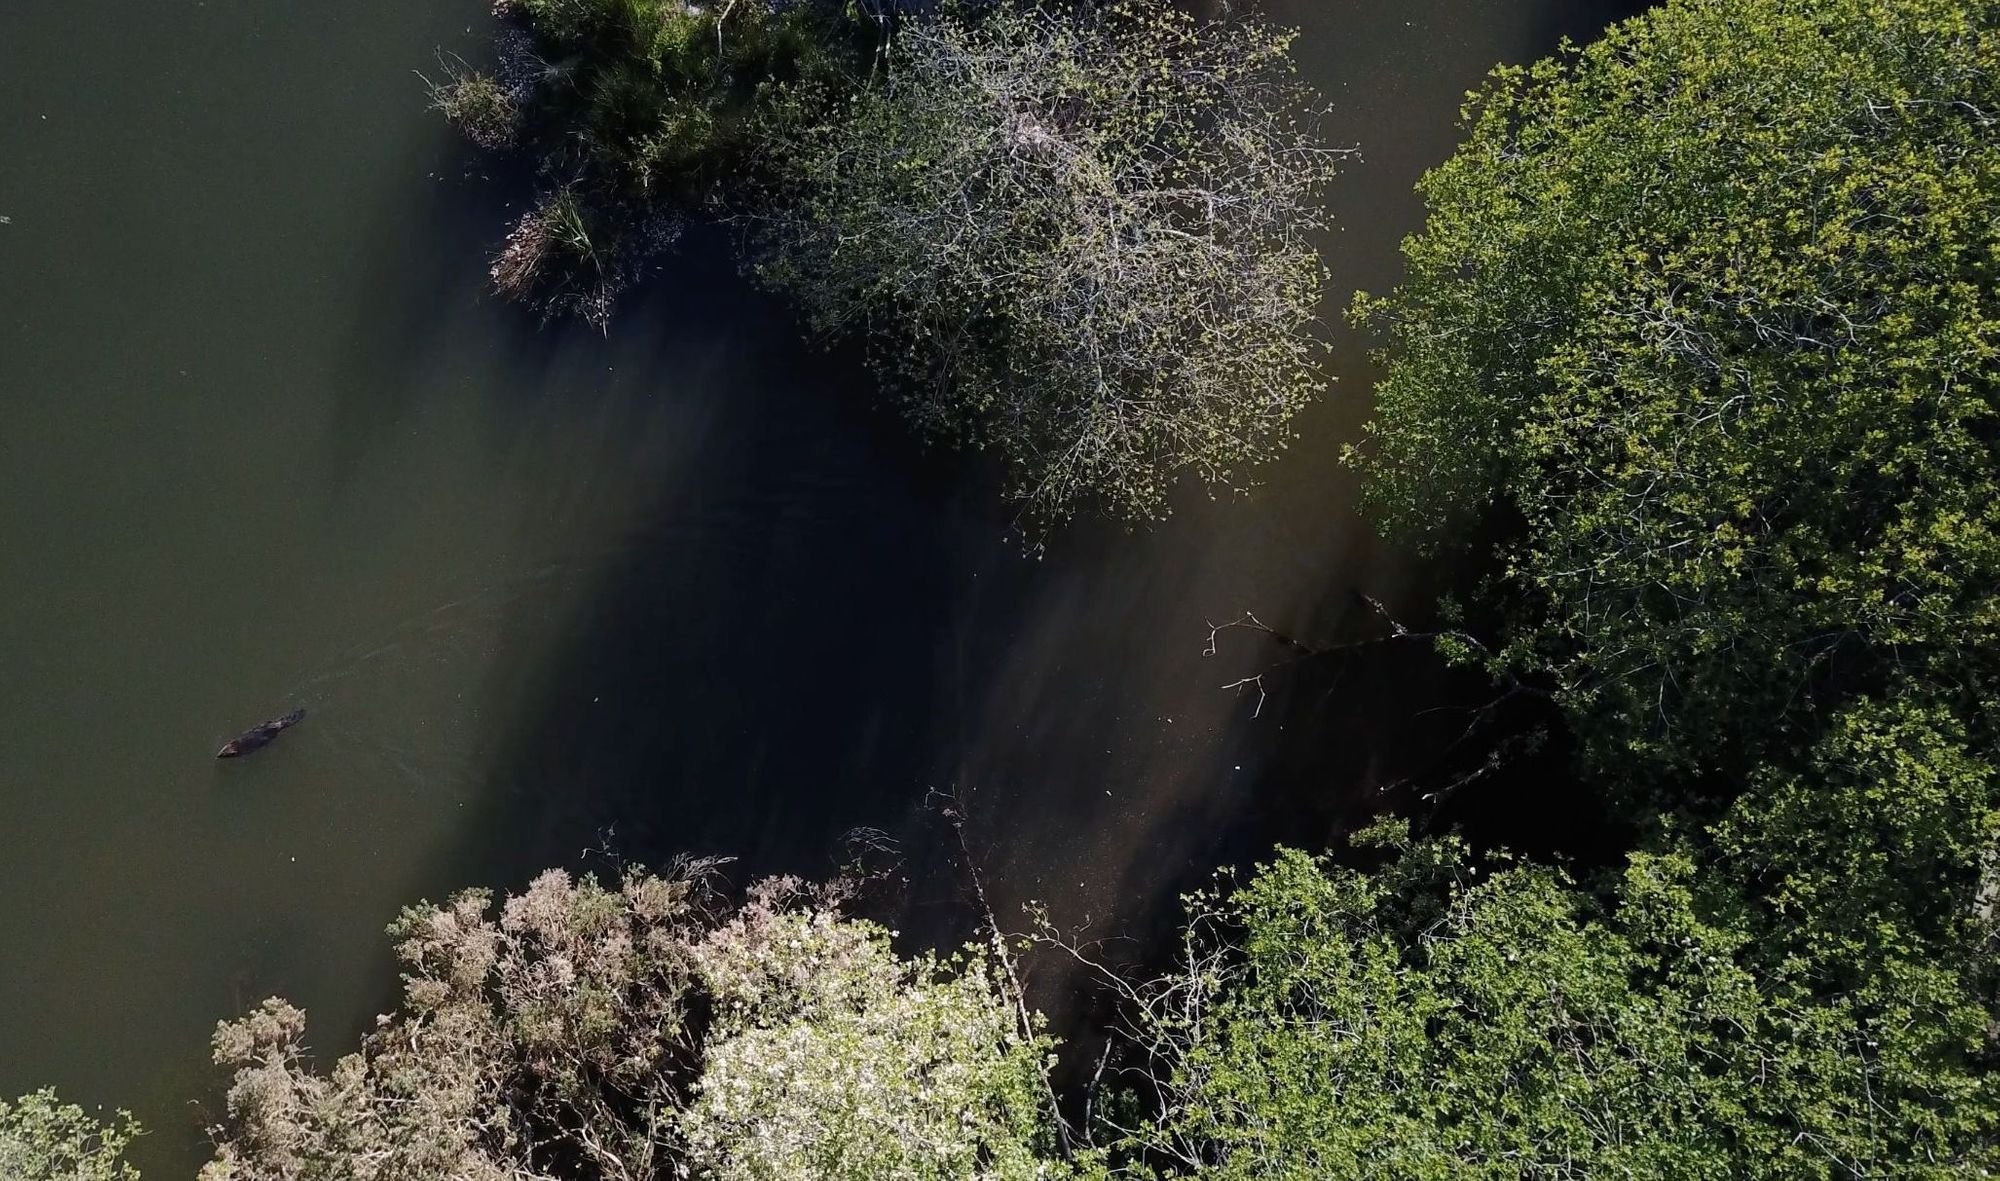 An aerial view of a beaver - the left hand side shows a beaver swimming.